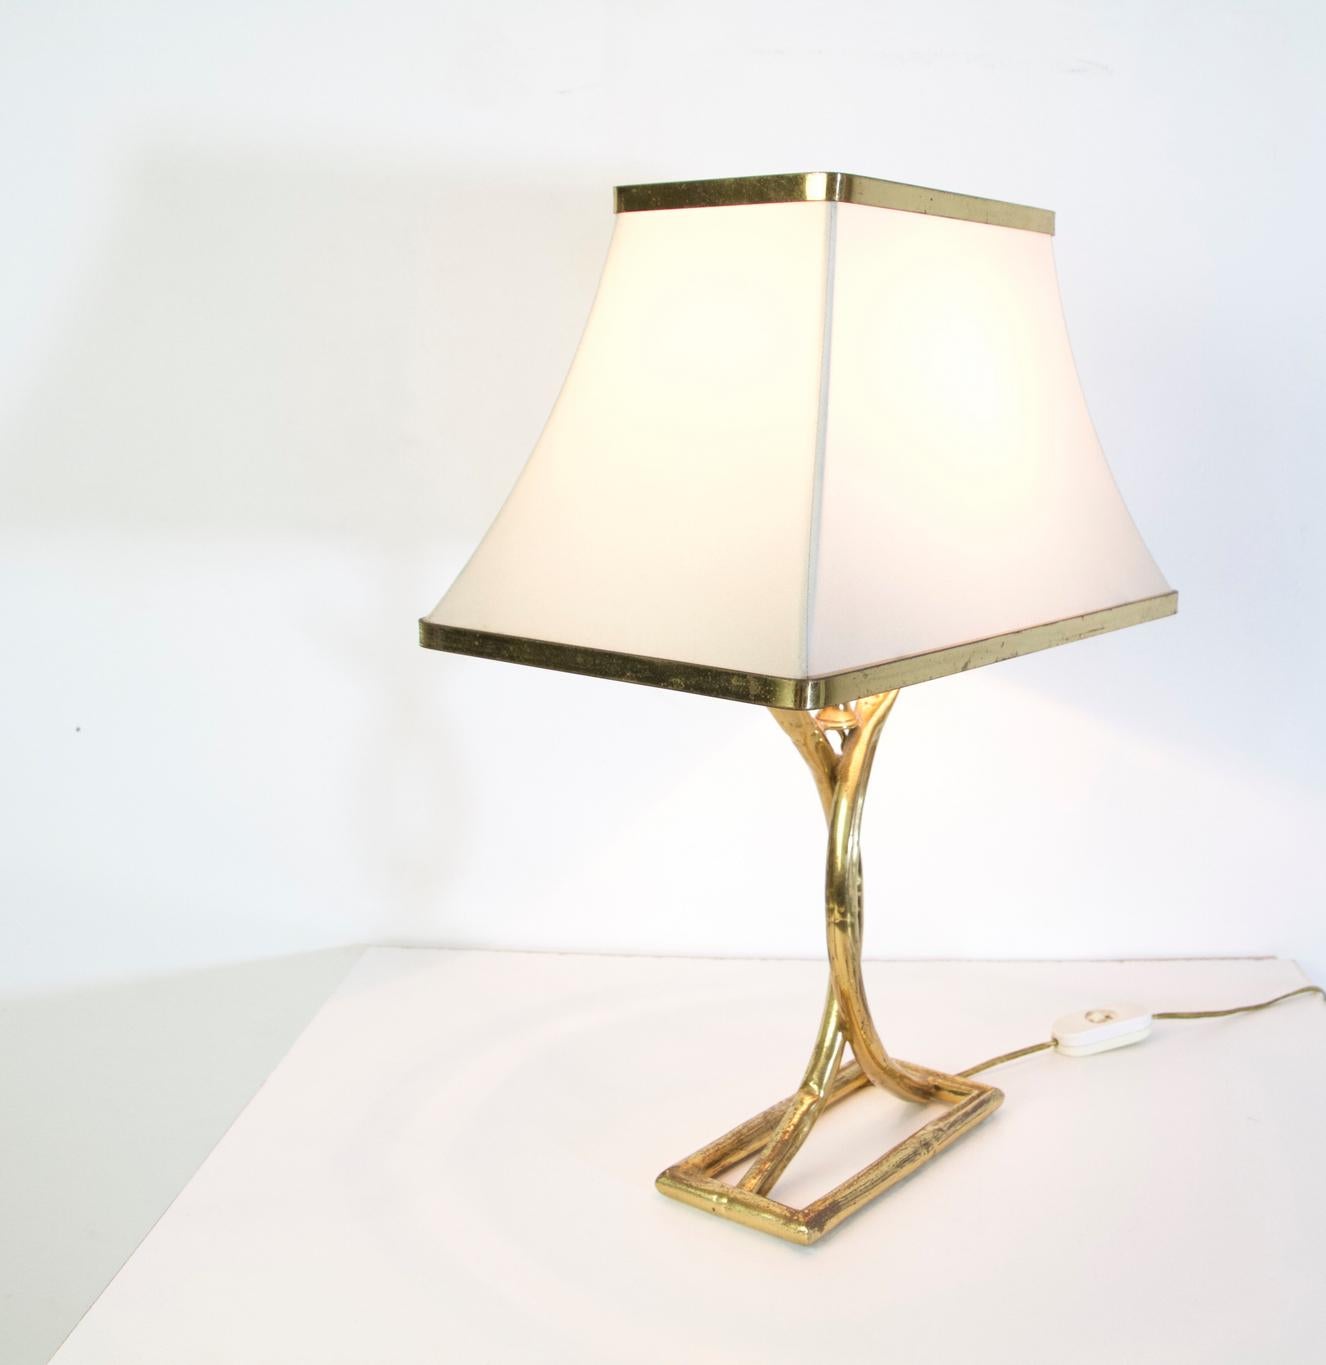 Pair of Italian Vintage Table Lamps in Brass, 1970's For Sale 3